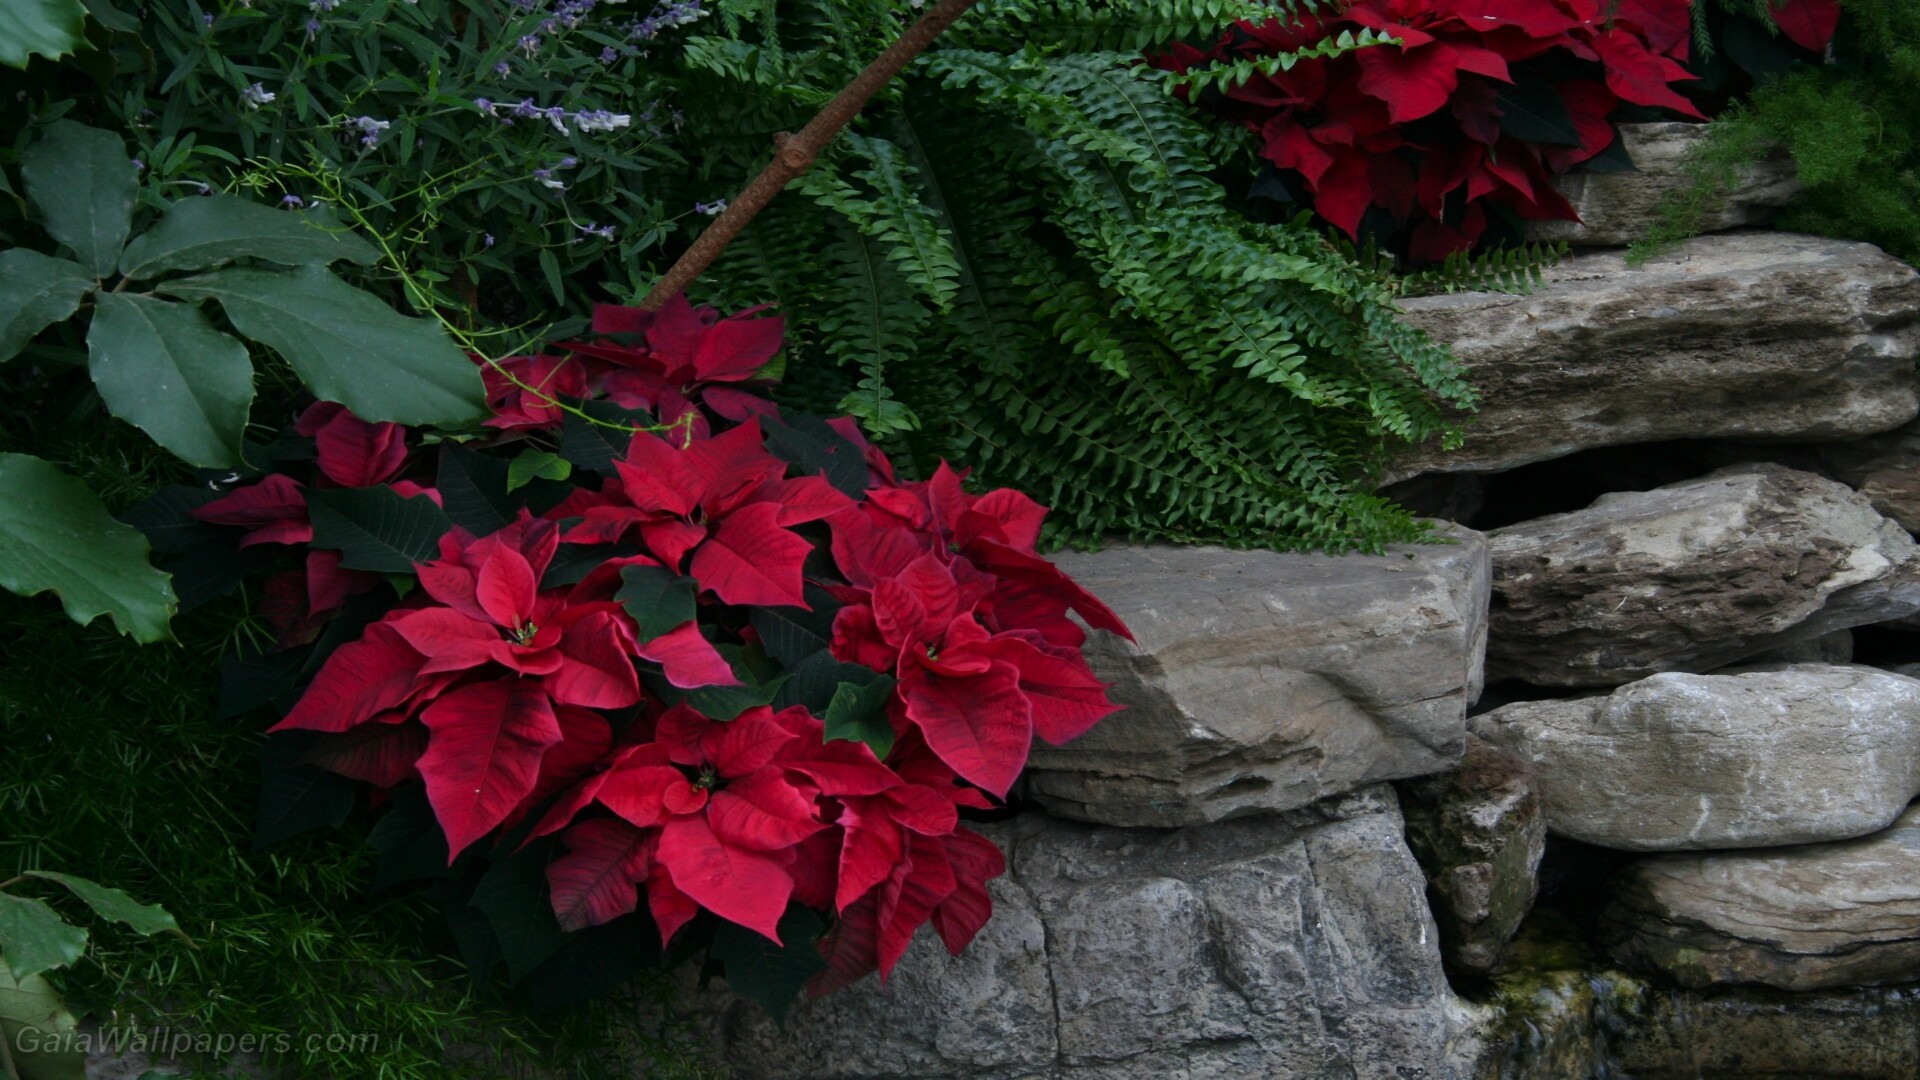 Poinsettia: The Paul Ecke Ranch in California grows over 70% of all Poinsettias purchased in the US. 1920x1080 Full HD Background.